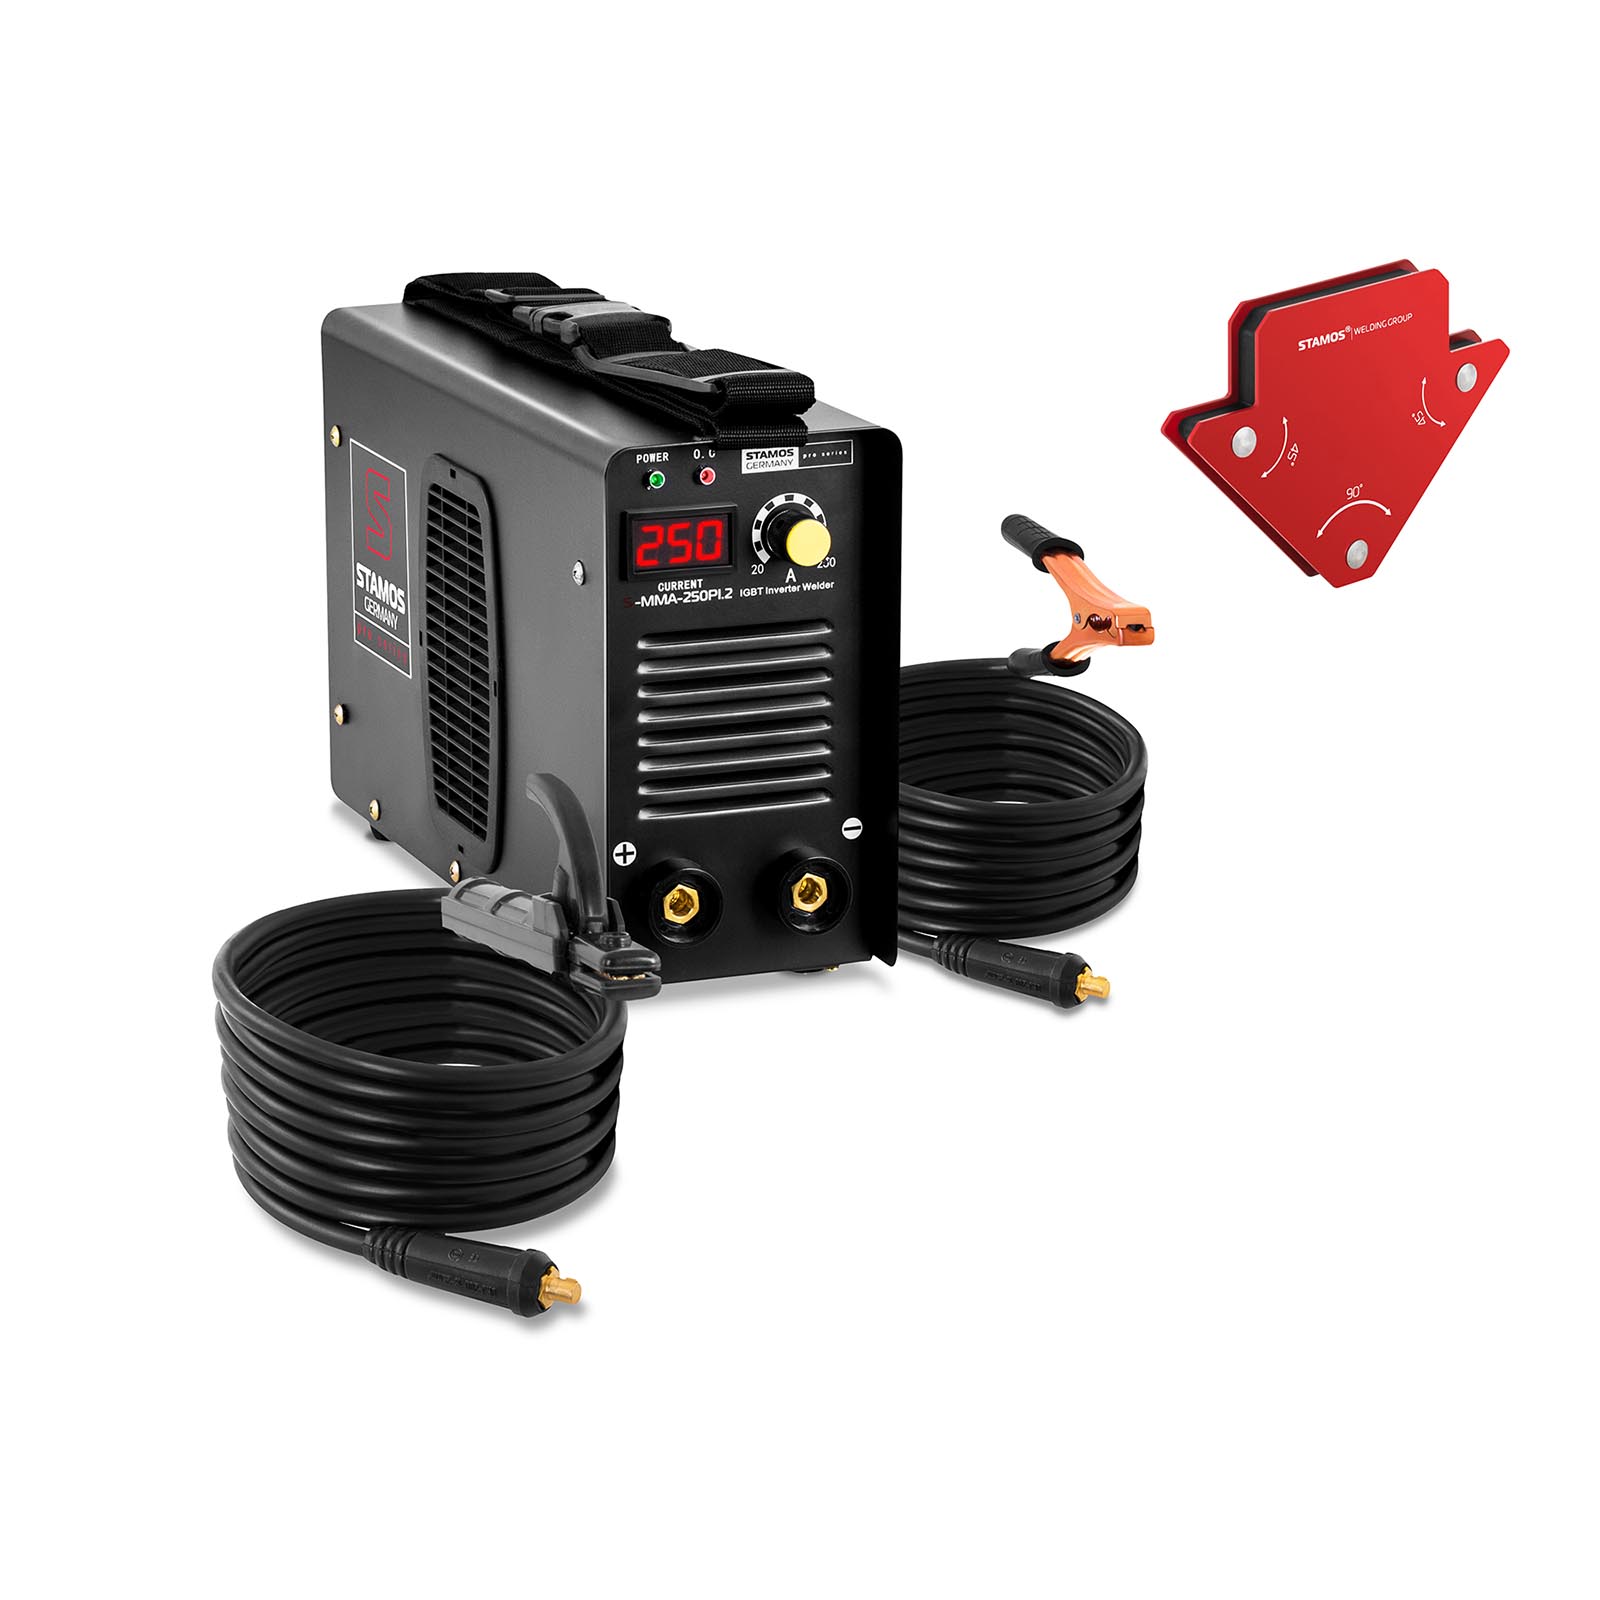 Set: Electrode Welding Machine with 2 Magnetic Welding Holders - 250 A - 8 m cable - hot start